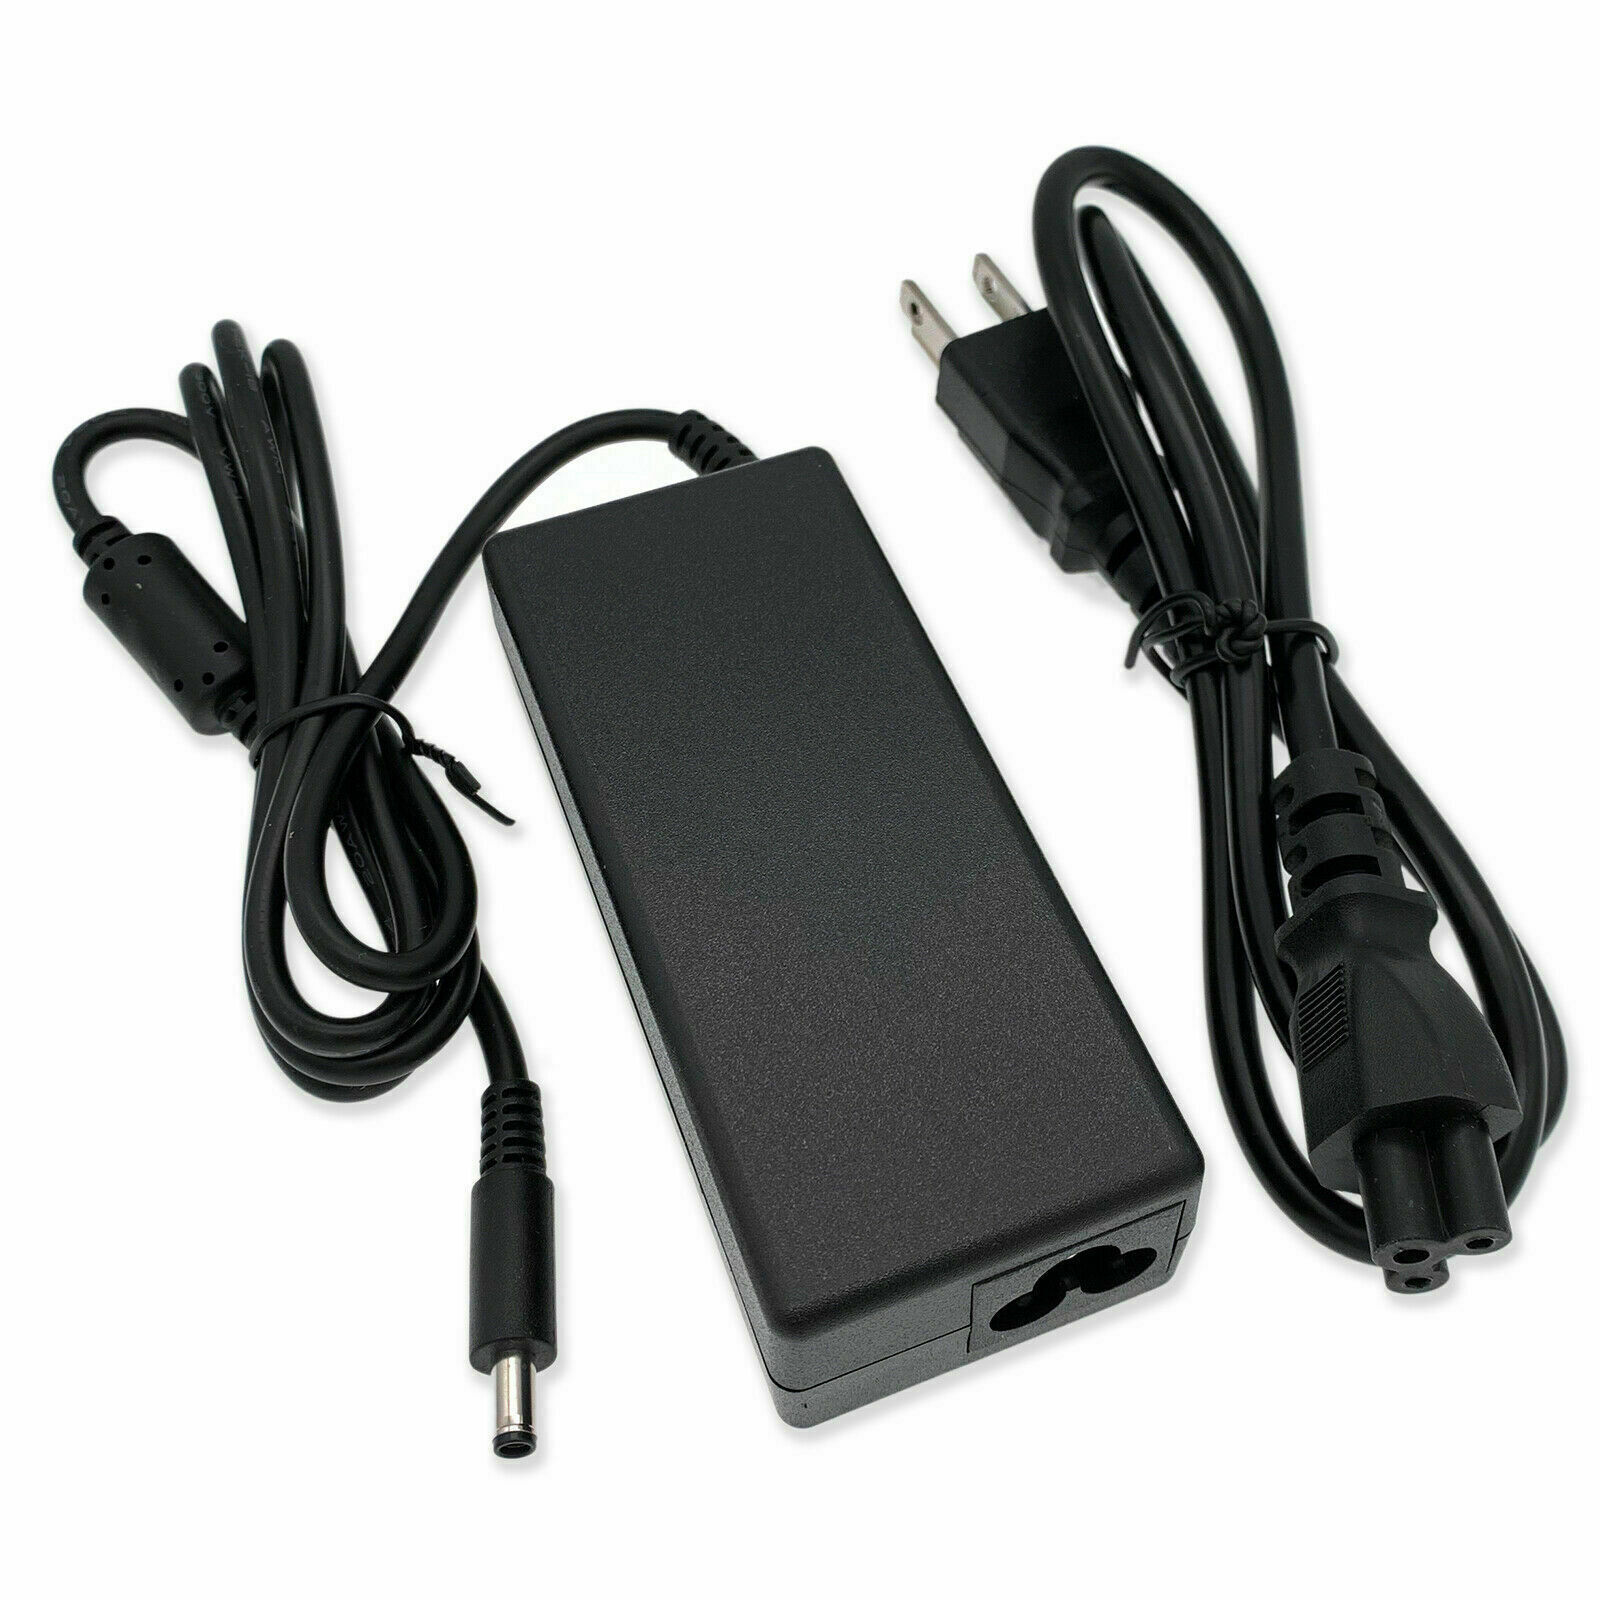 For HP 15-r000 15-r100 15-r200 Laptop 65W AC Adapter Charger Power Supply Cord